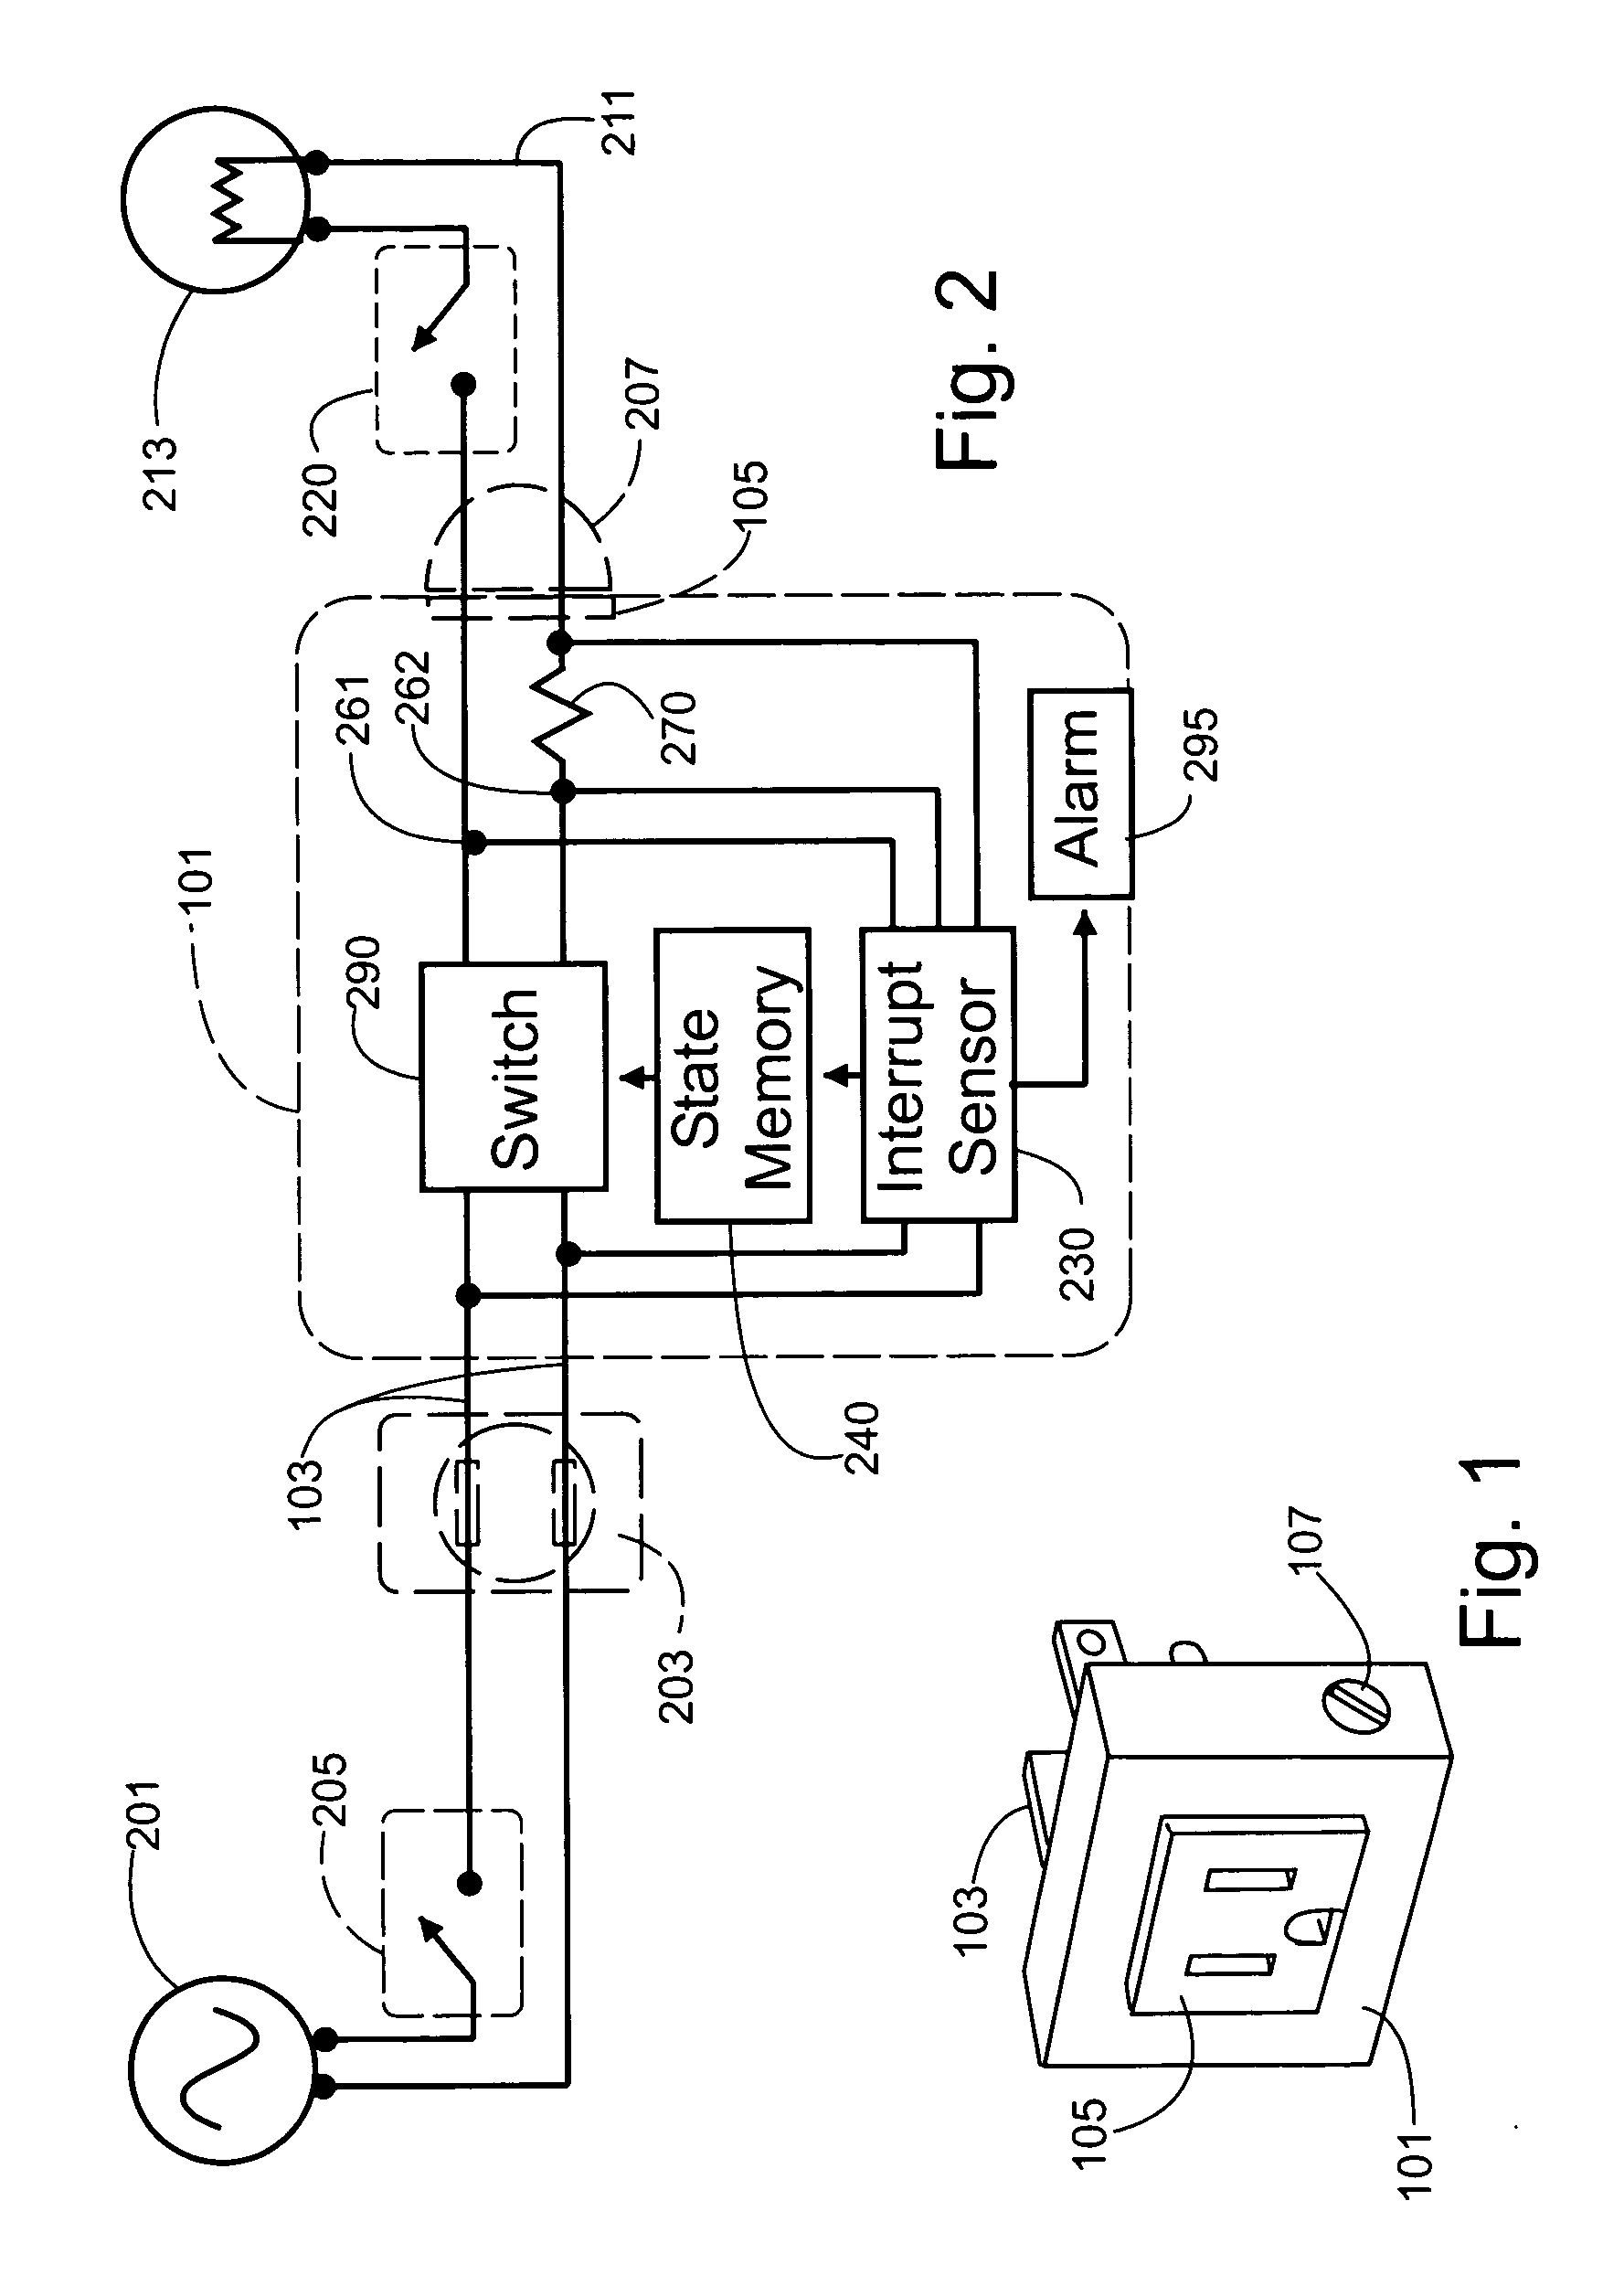 Control circuit for turning a device on or off using a conventional wall switch or a device switch